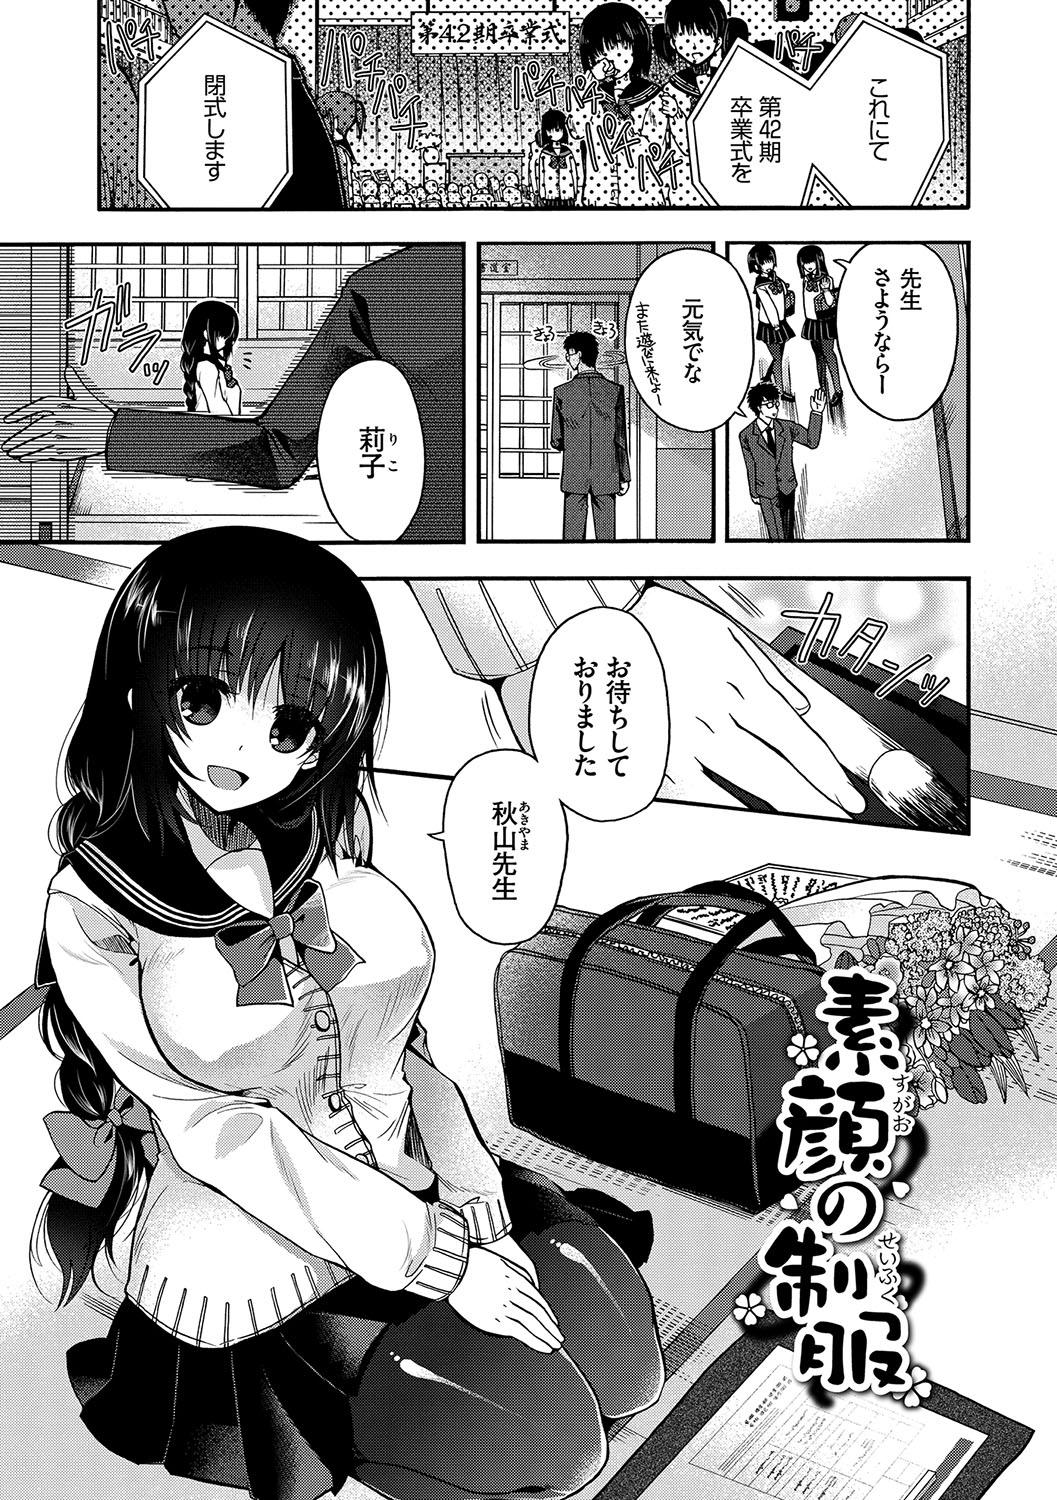 Hatsukoi Melty - Melty First Love 115